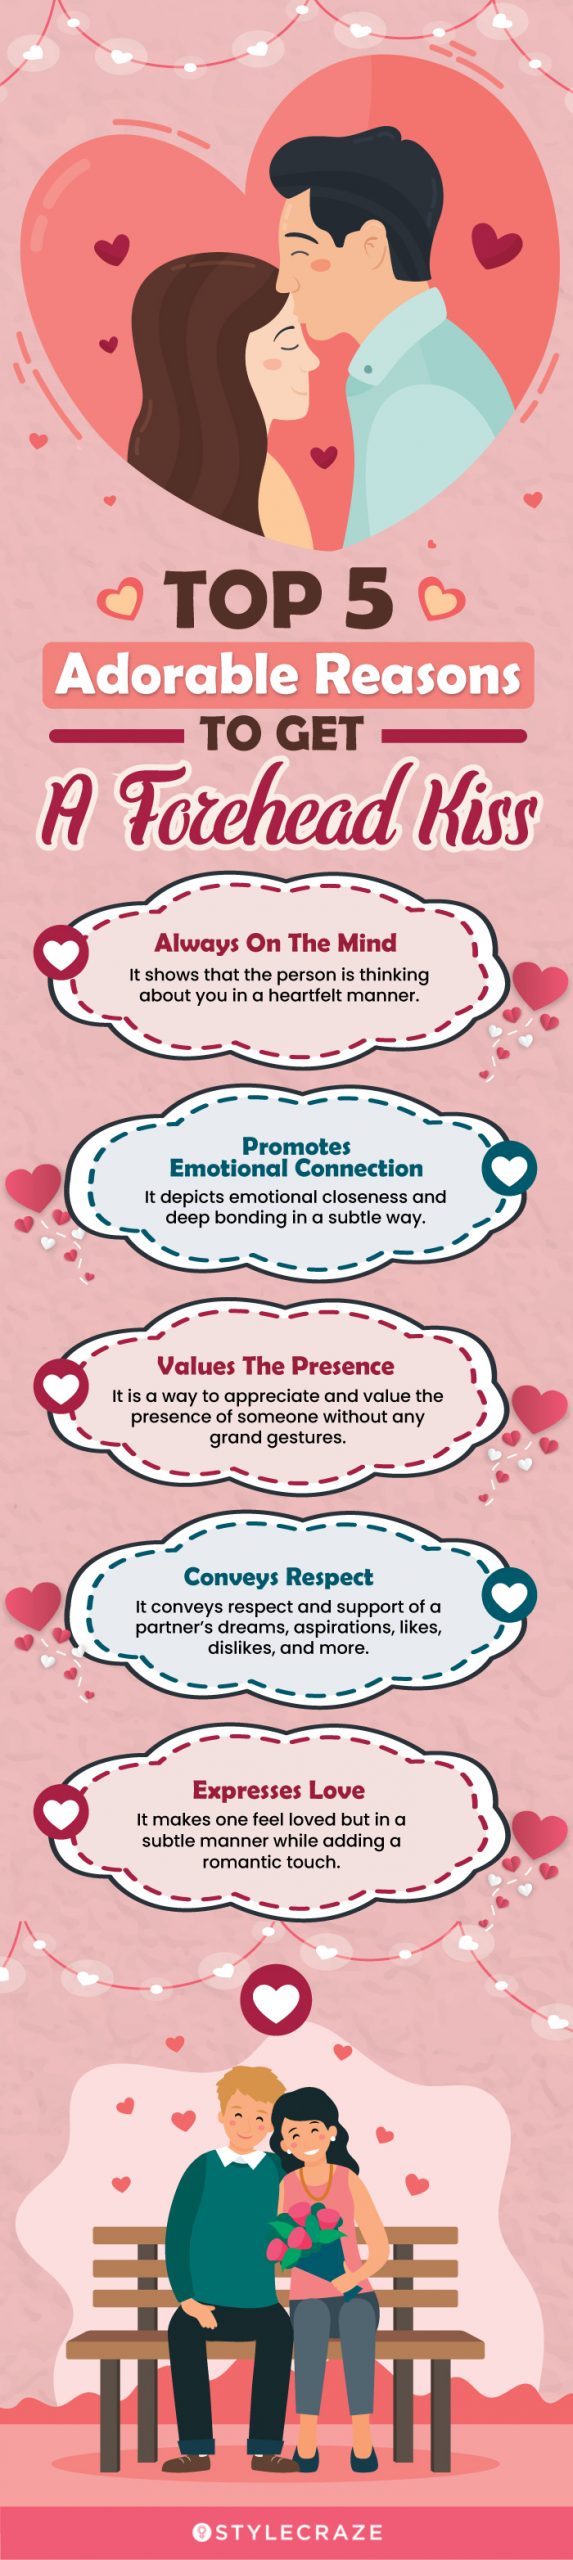 top 5 adorable reasons to get a forehead kiss (infographic)